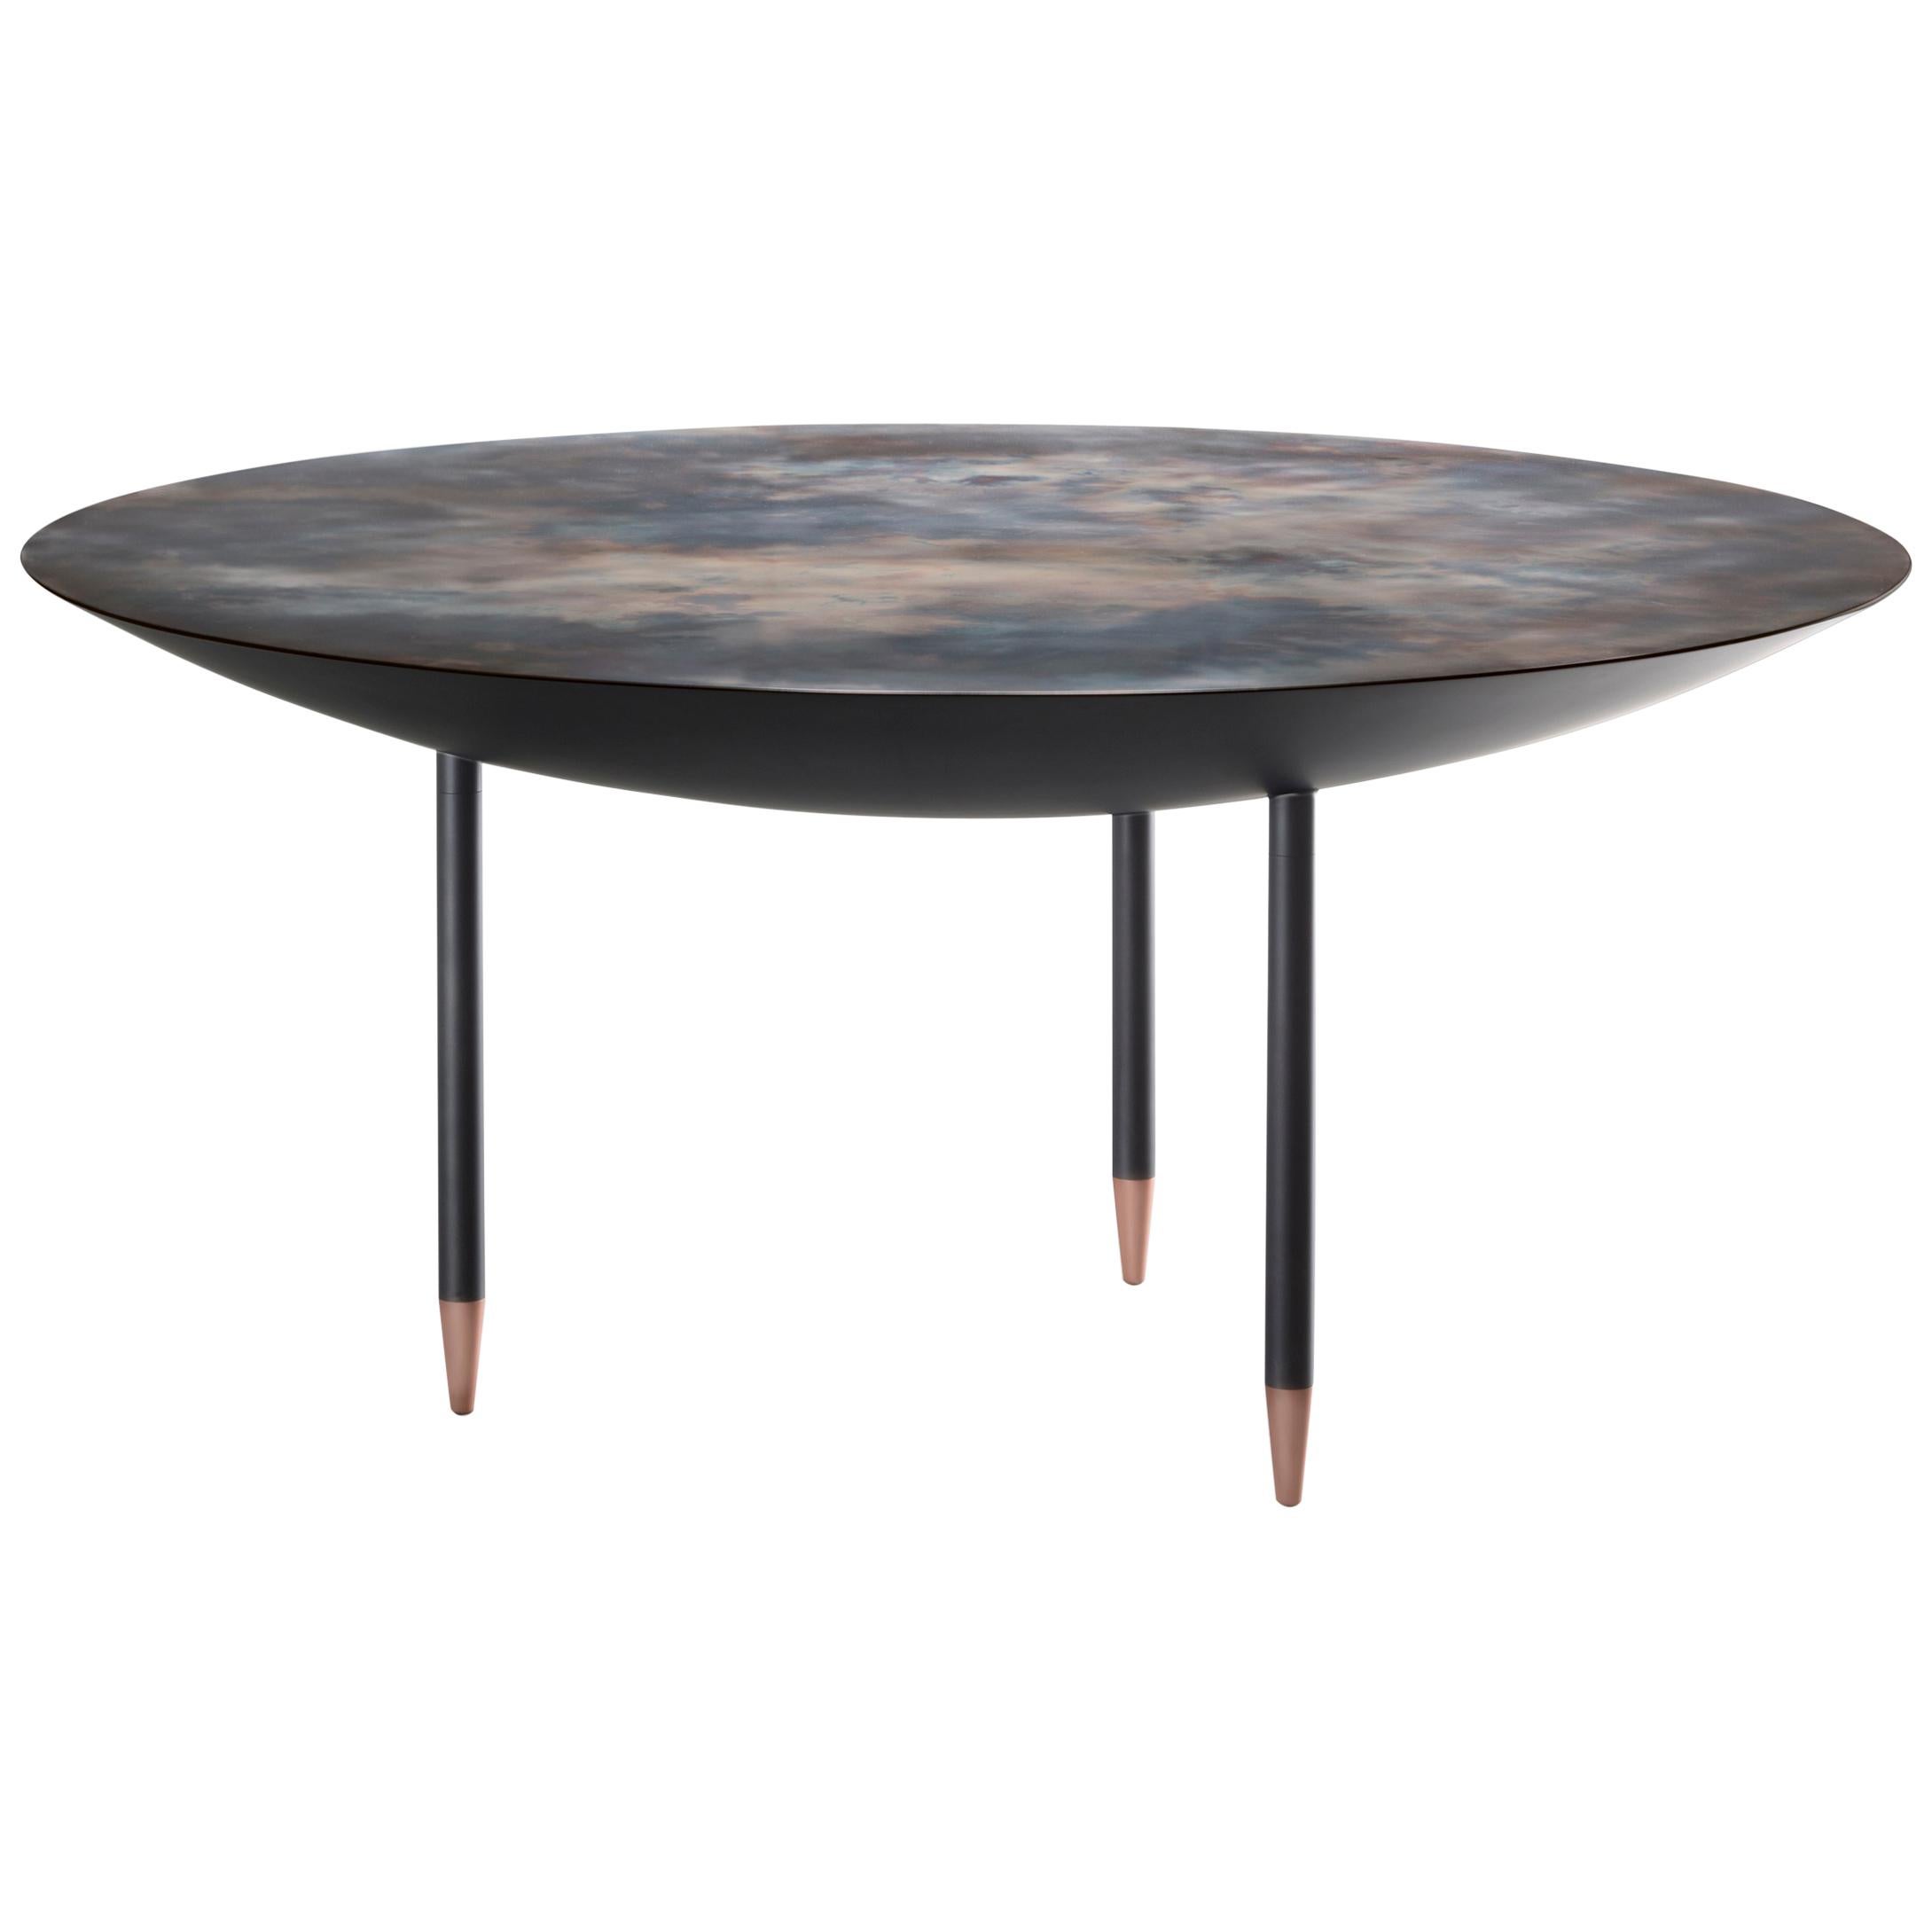 DeCastelli Roma 137 Table in Stainless Steel with Copper Feet by Minelli Fossati For Sale